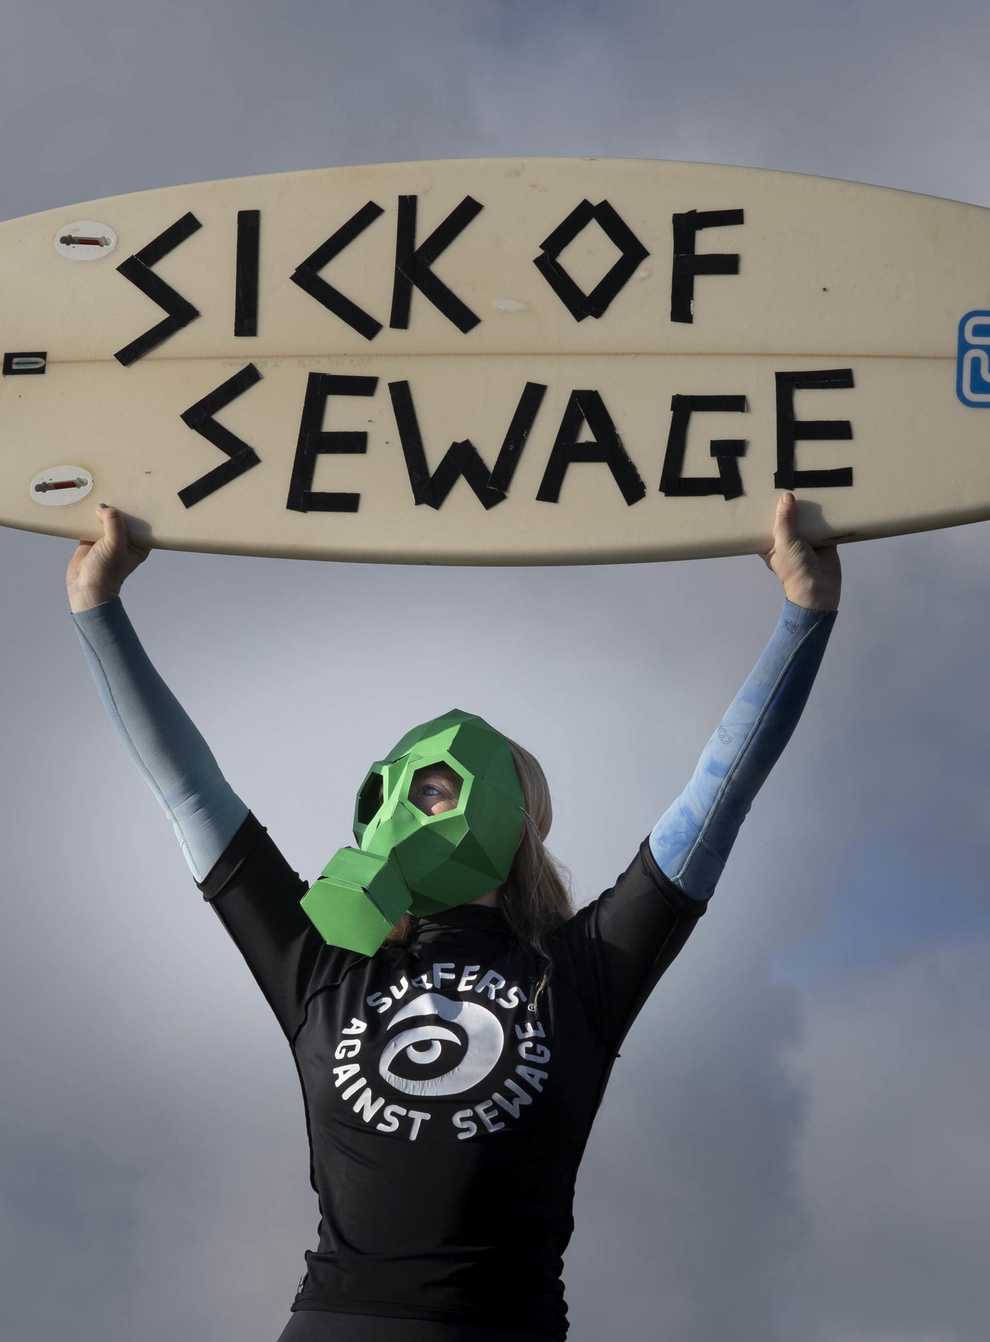 The UK Government’s scheme to tackle sewage discharge has come in for criticism (Emily Whitfield-Wicks/PA)